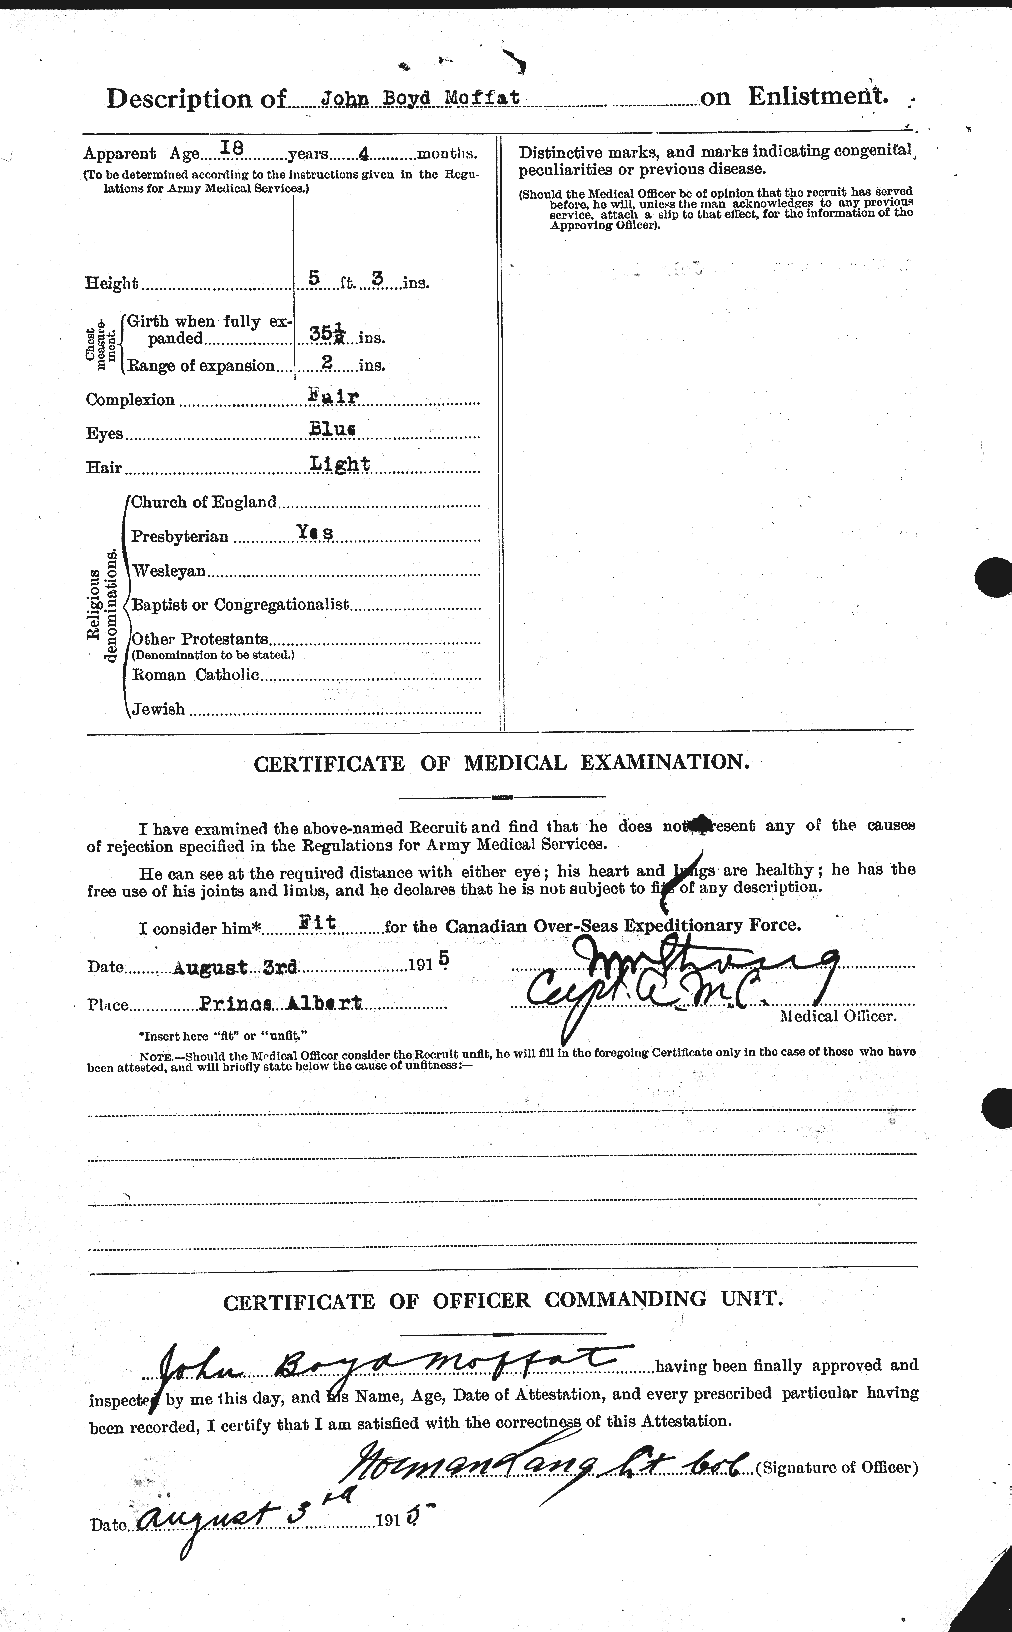 Personnel Records of the First World War - CEF 499047b